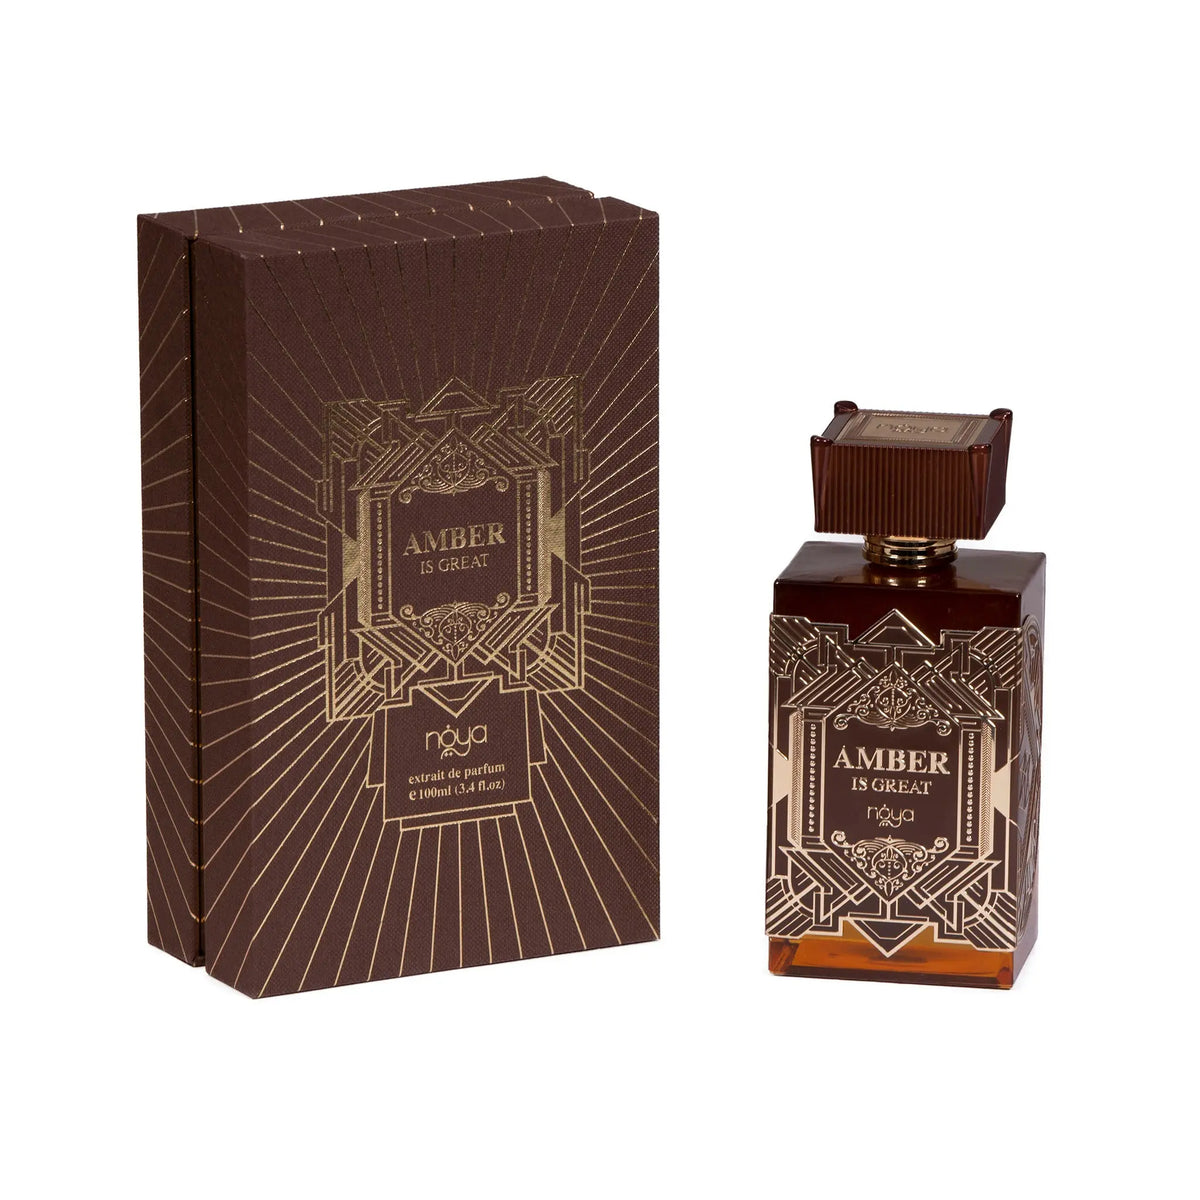 A perfume product set titled "AMBER IS GREAT," featuring a square glass bottle with brown tones and intricate geometric patterns. The cap matches the bottle's design. Accompanying the bottle is a similarly patterned brown box with gold line art and lettering, stating "AMBER IS GREAT" at the center, and the brand "náyá" at the bottom. The background is white.